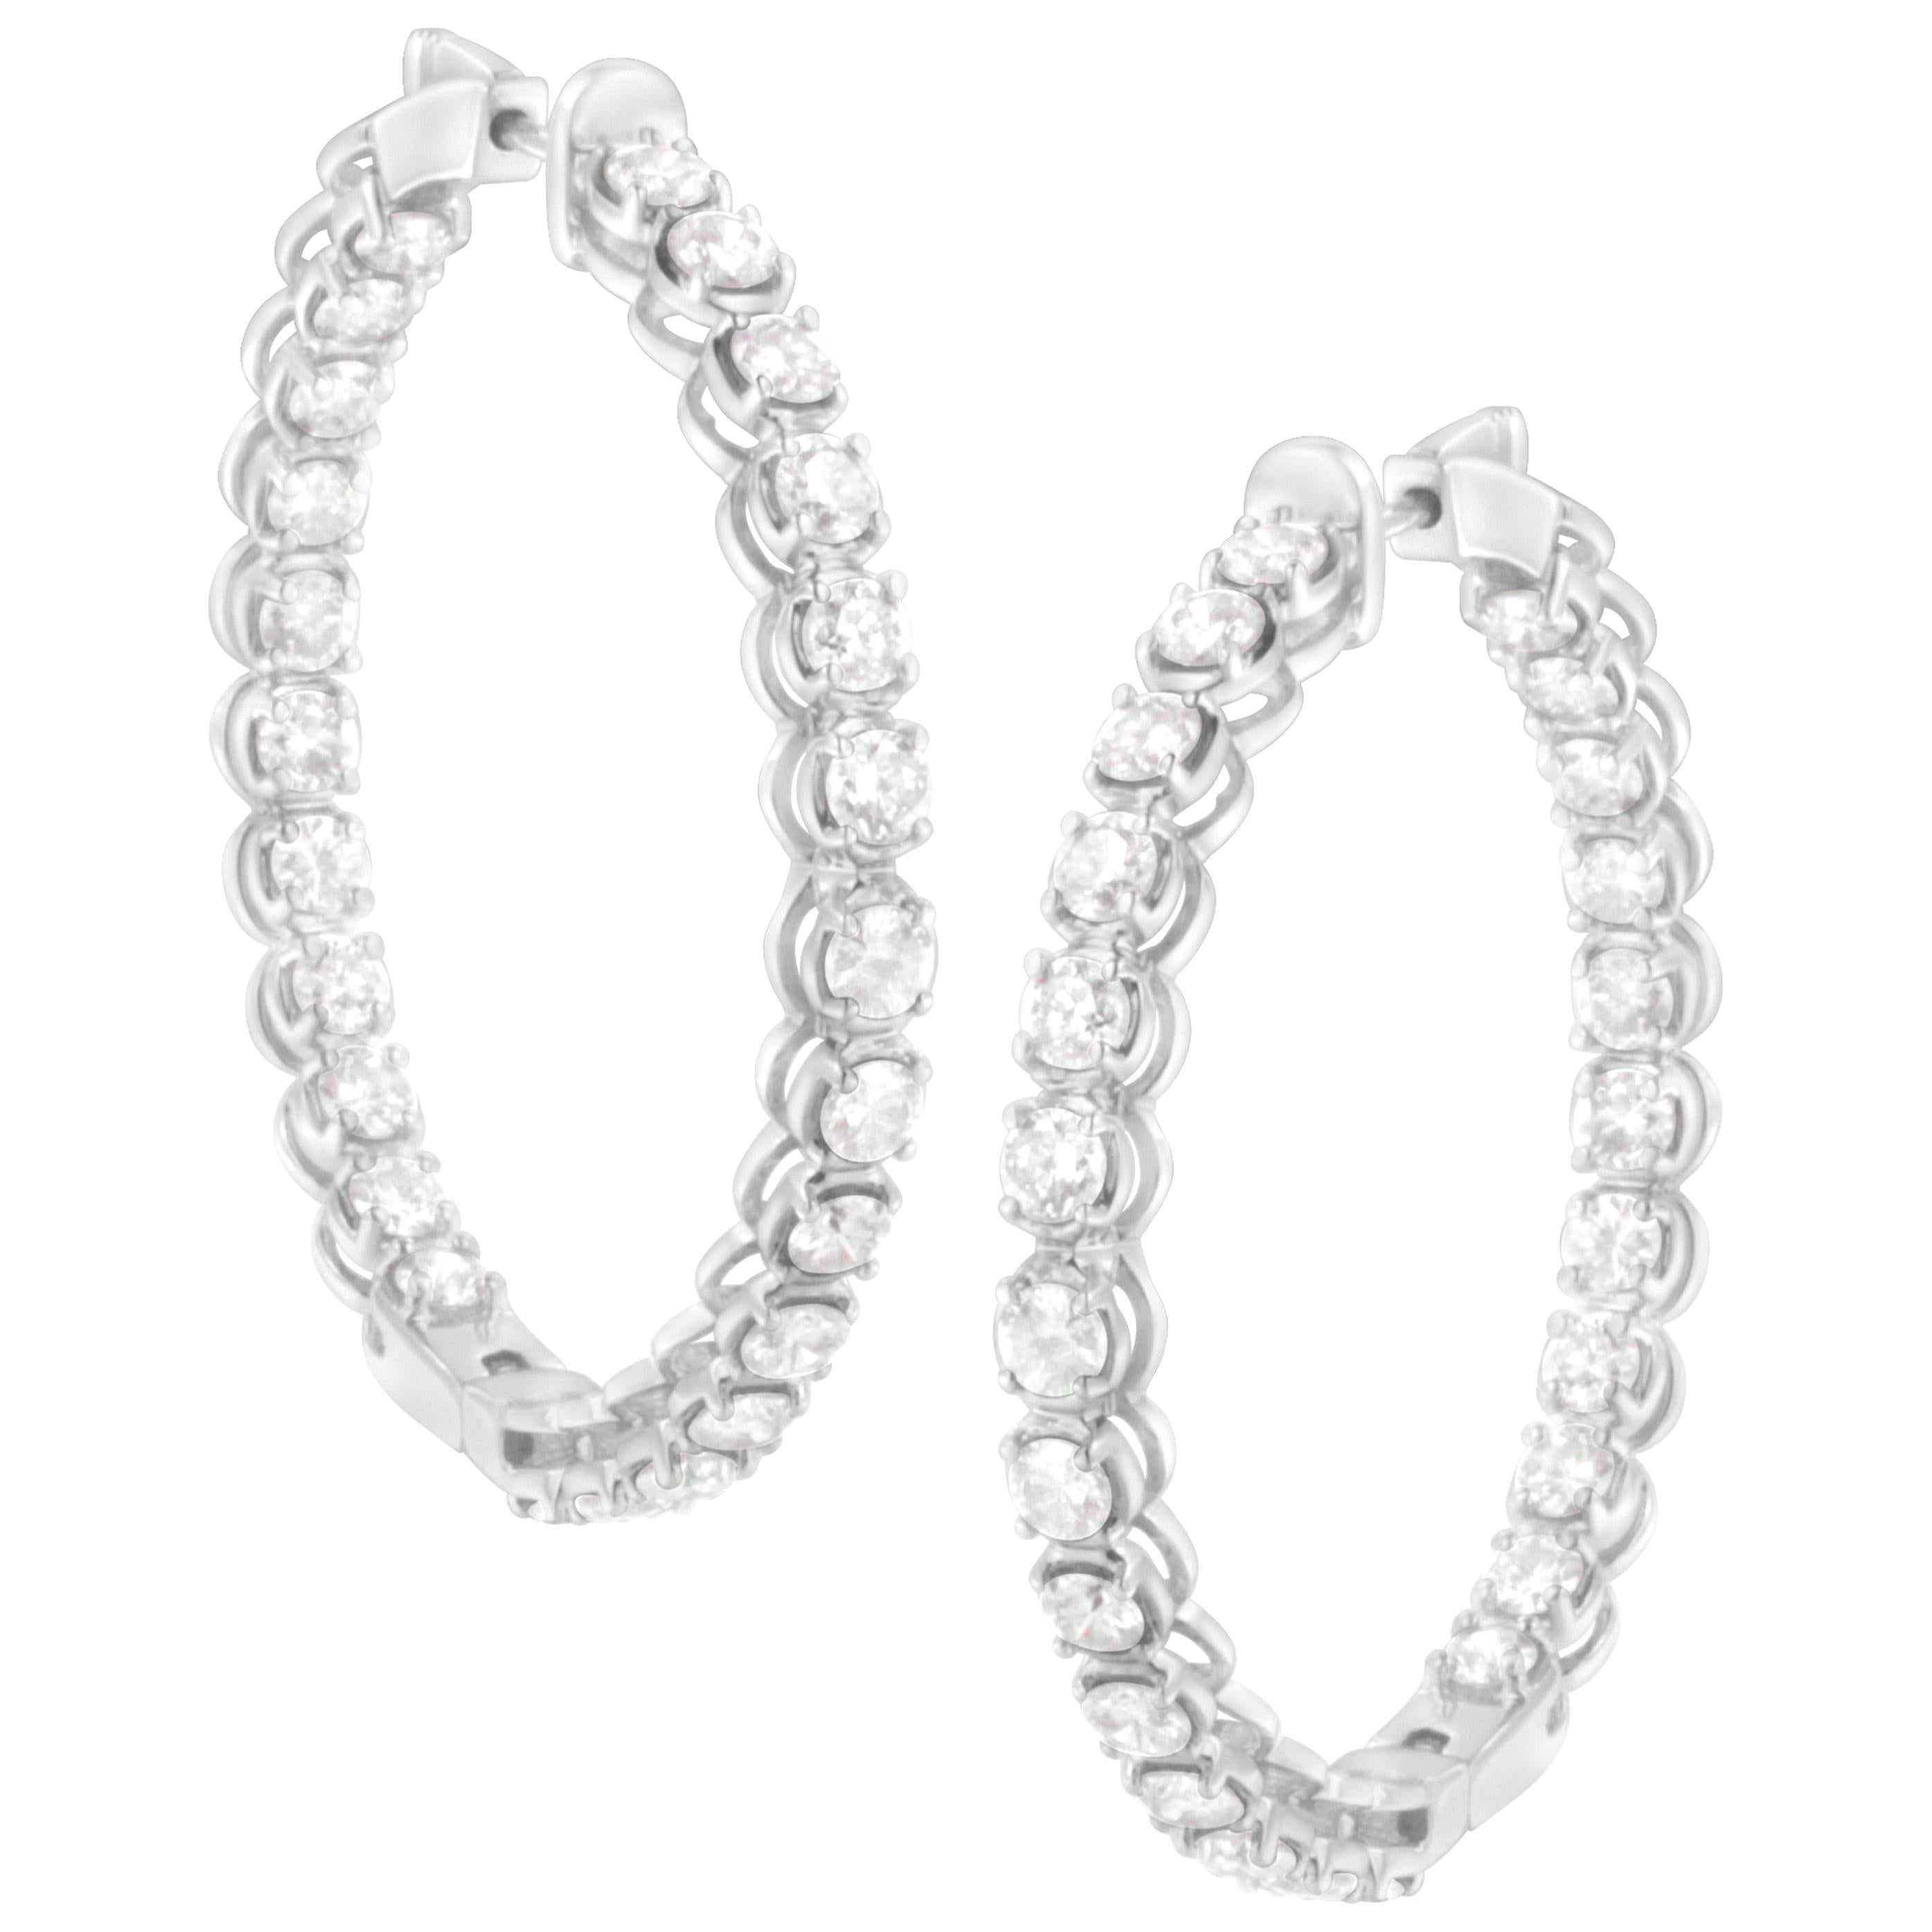 925 STERLING SILVER HOOP EARRINGS W/3 ROW MAN MADE DIAMOND ACCENTS/ NEW DESIGN!! 